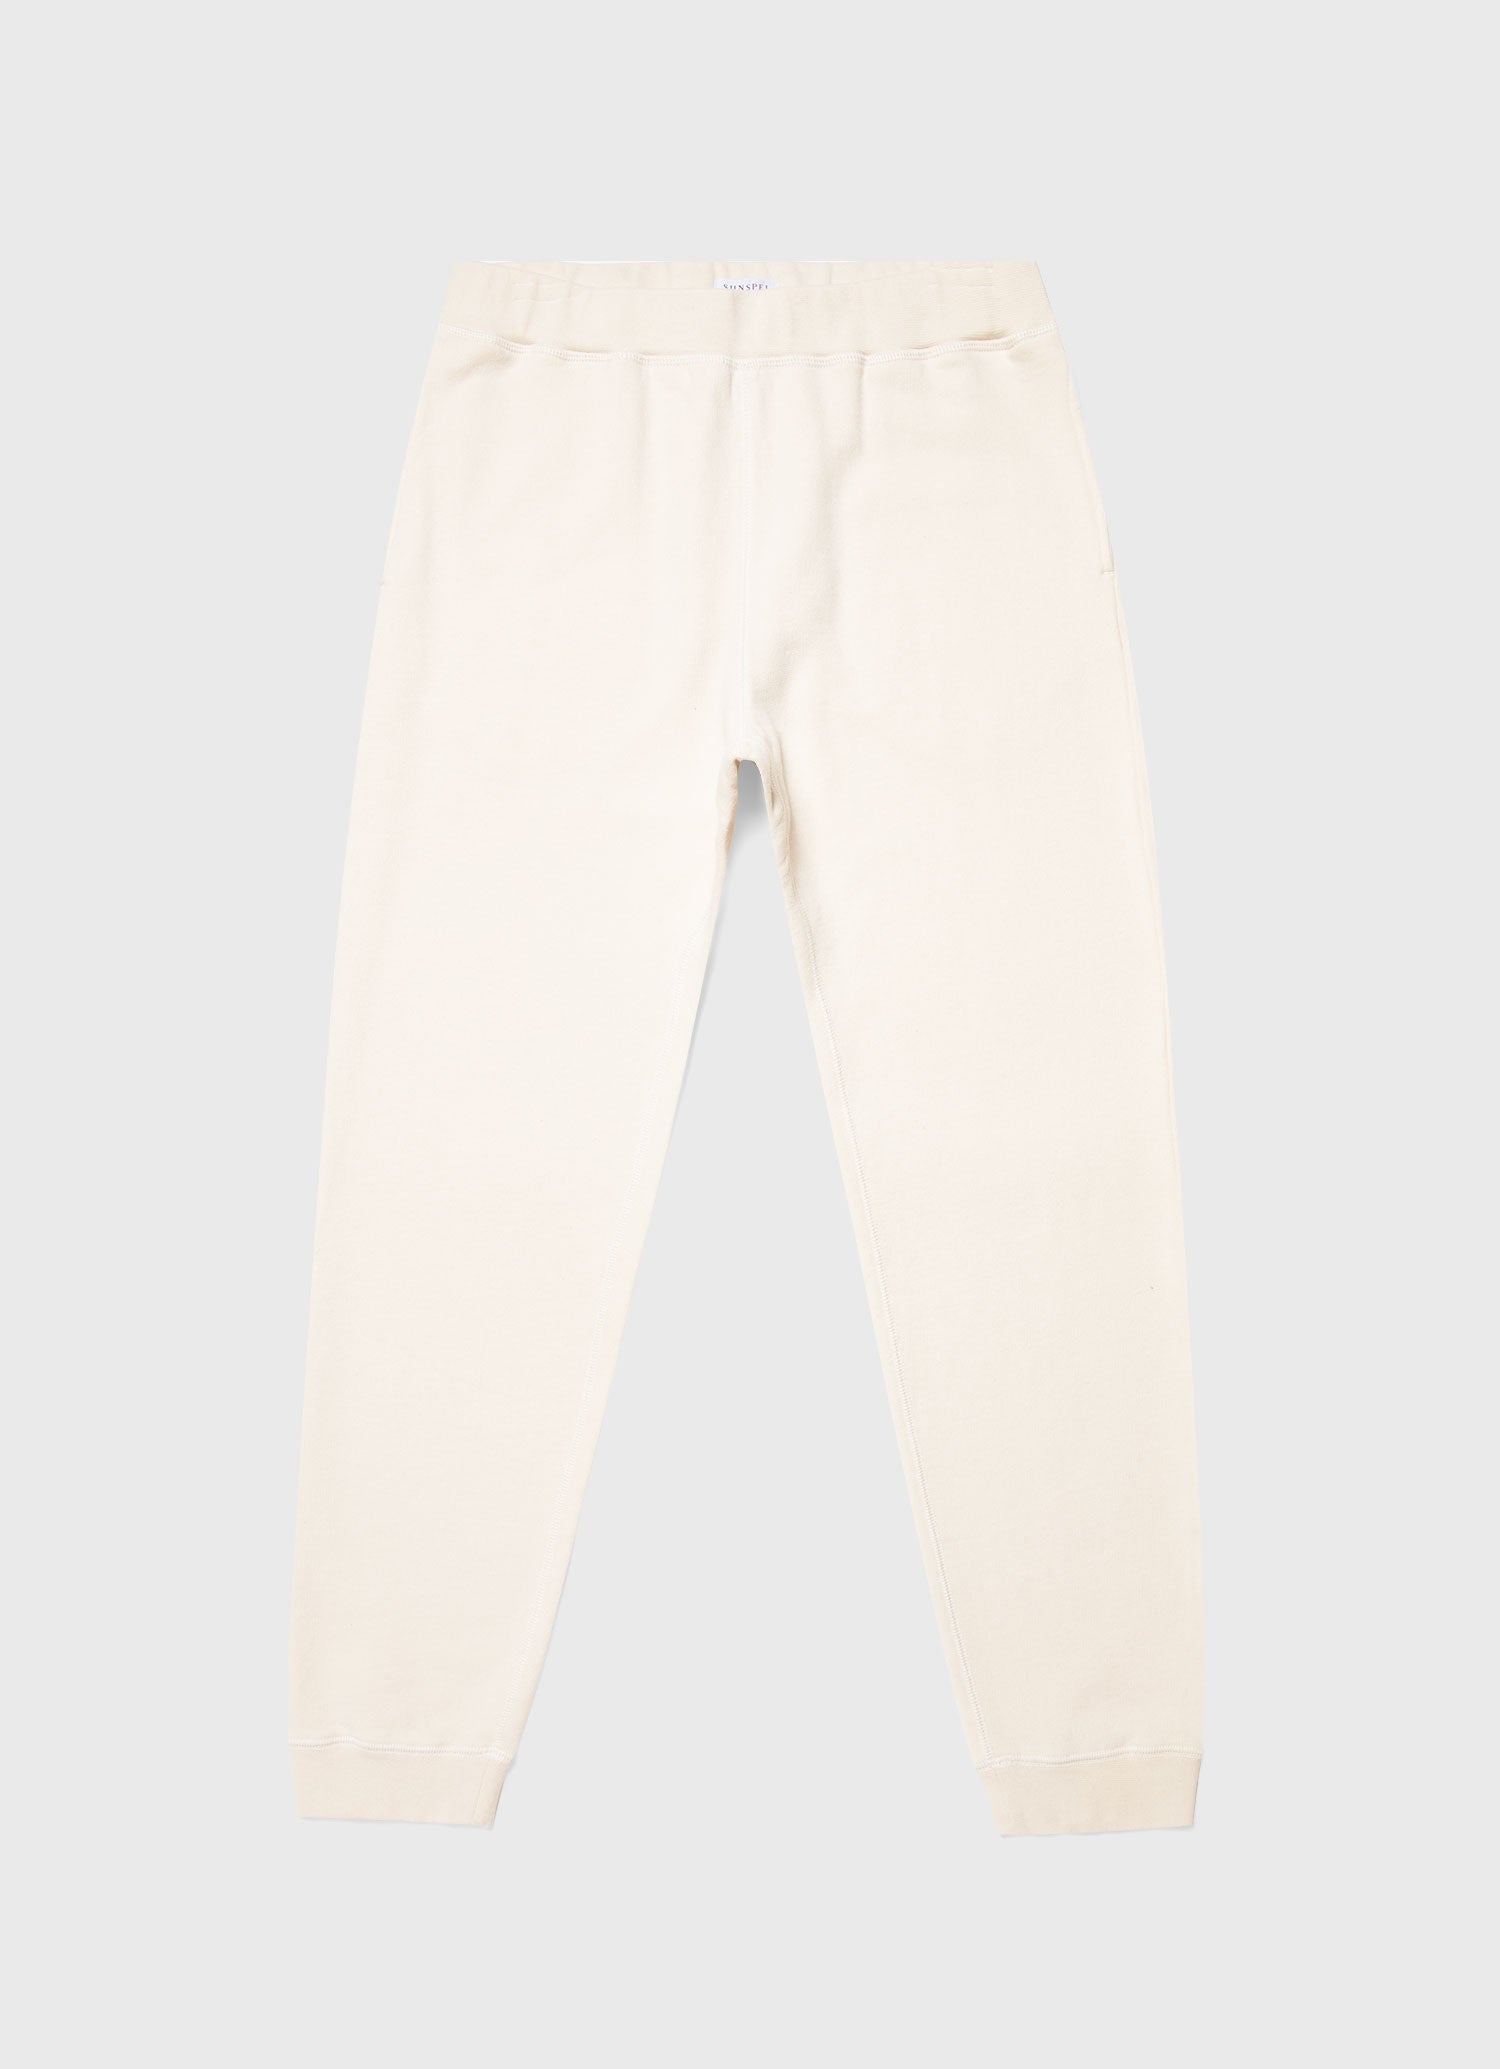 Men's Undyed Loopback Sweatpants in Undyed